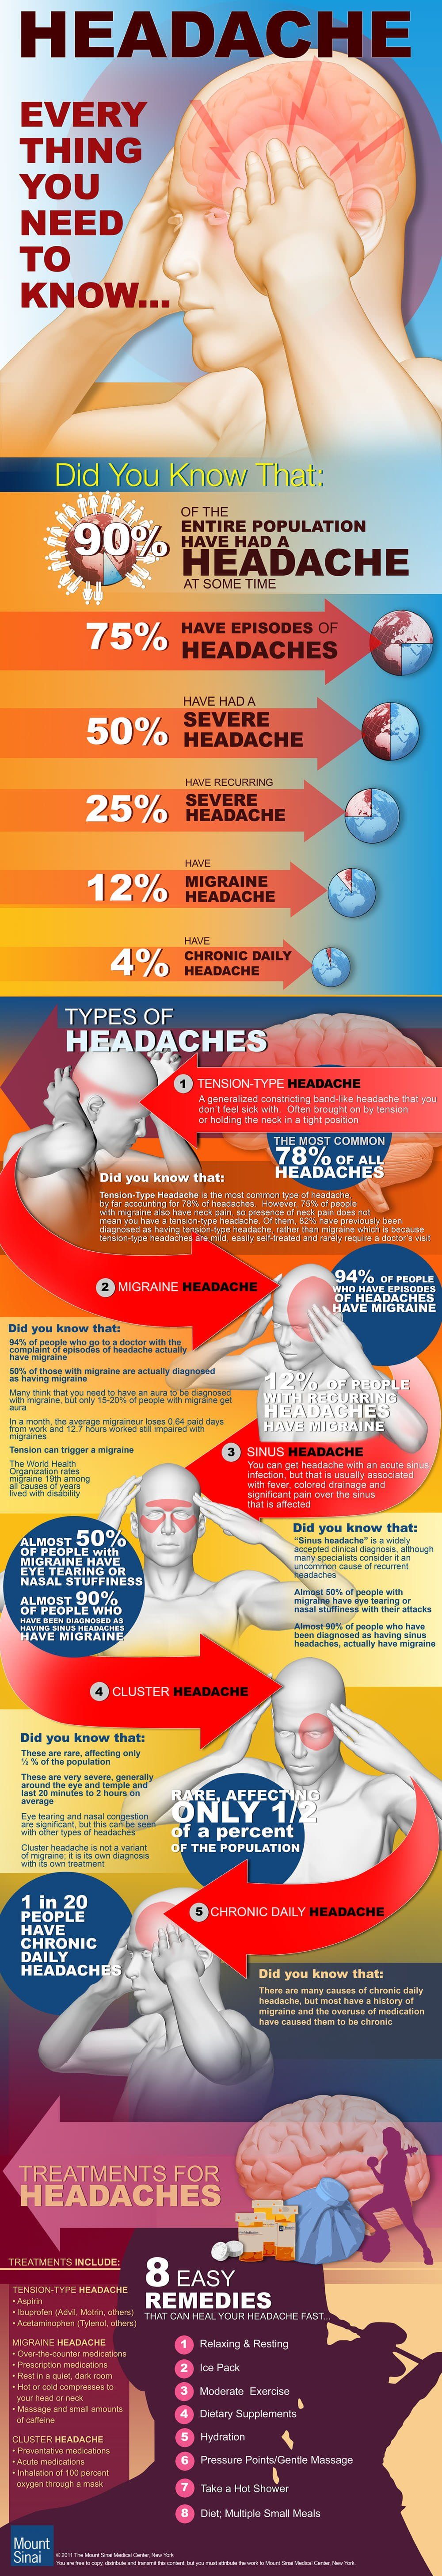 All About Headaches Infographic